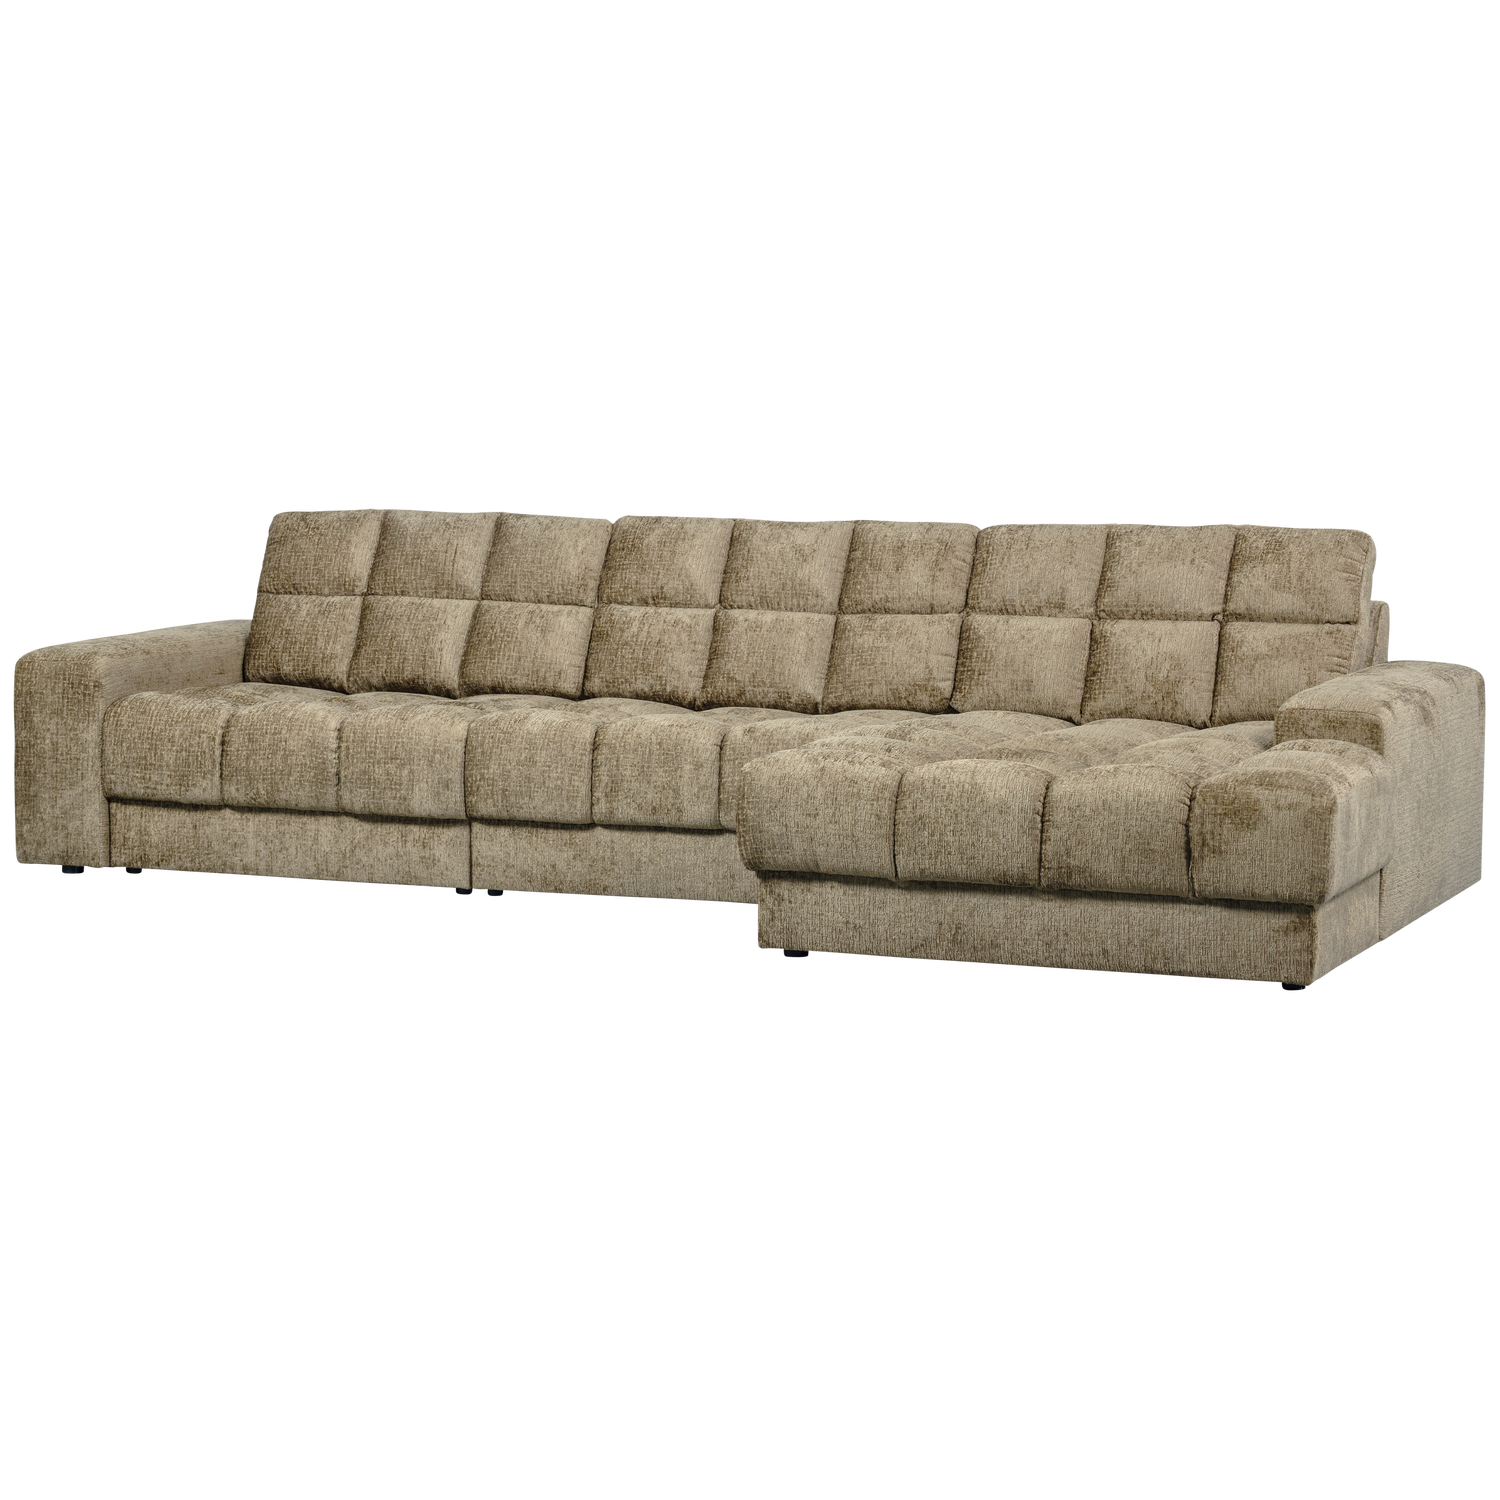 WOOOD Second date chaise longue rechts structure velvet wheatfield Beige|Taupe Bank